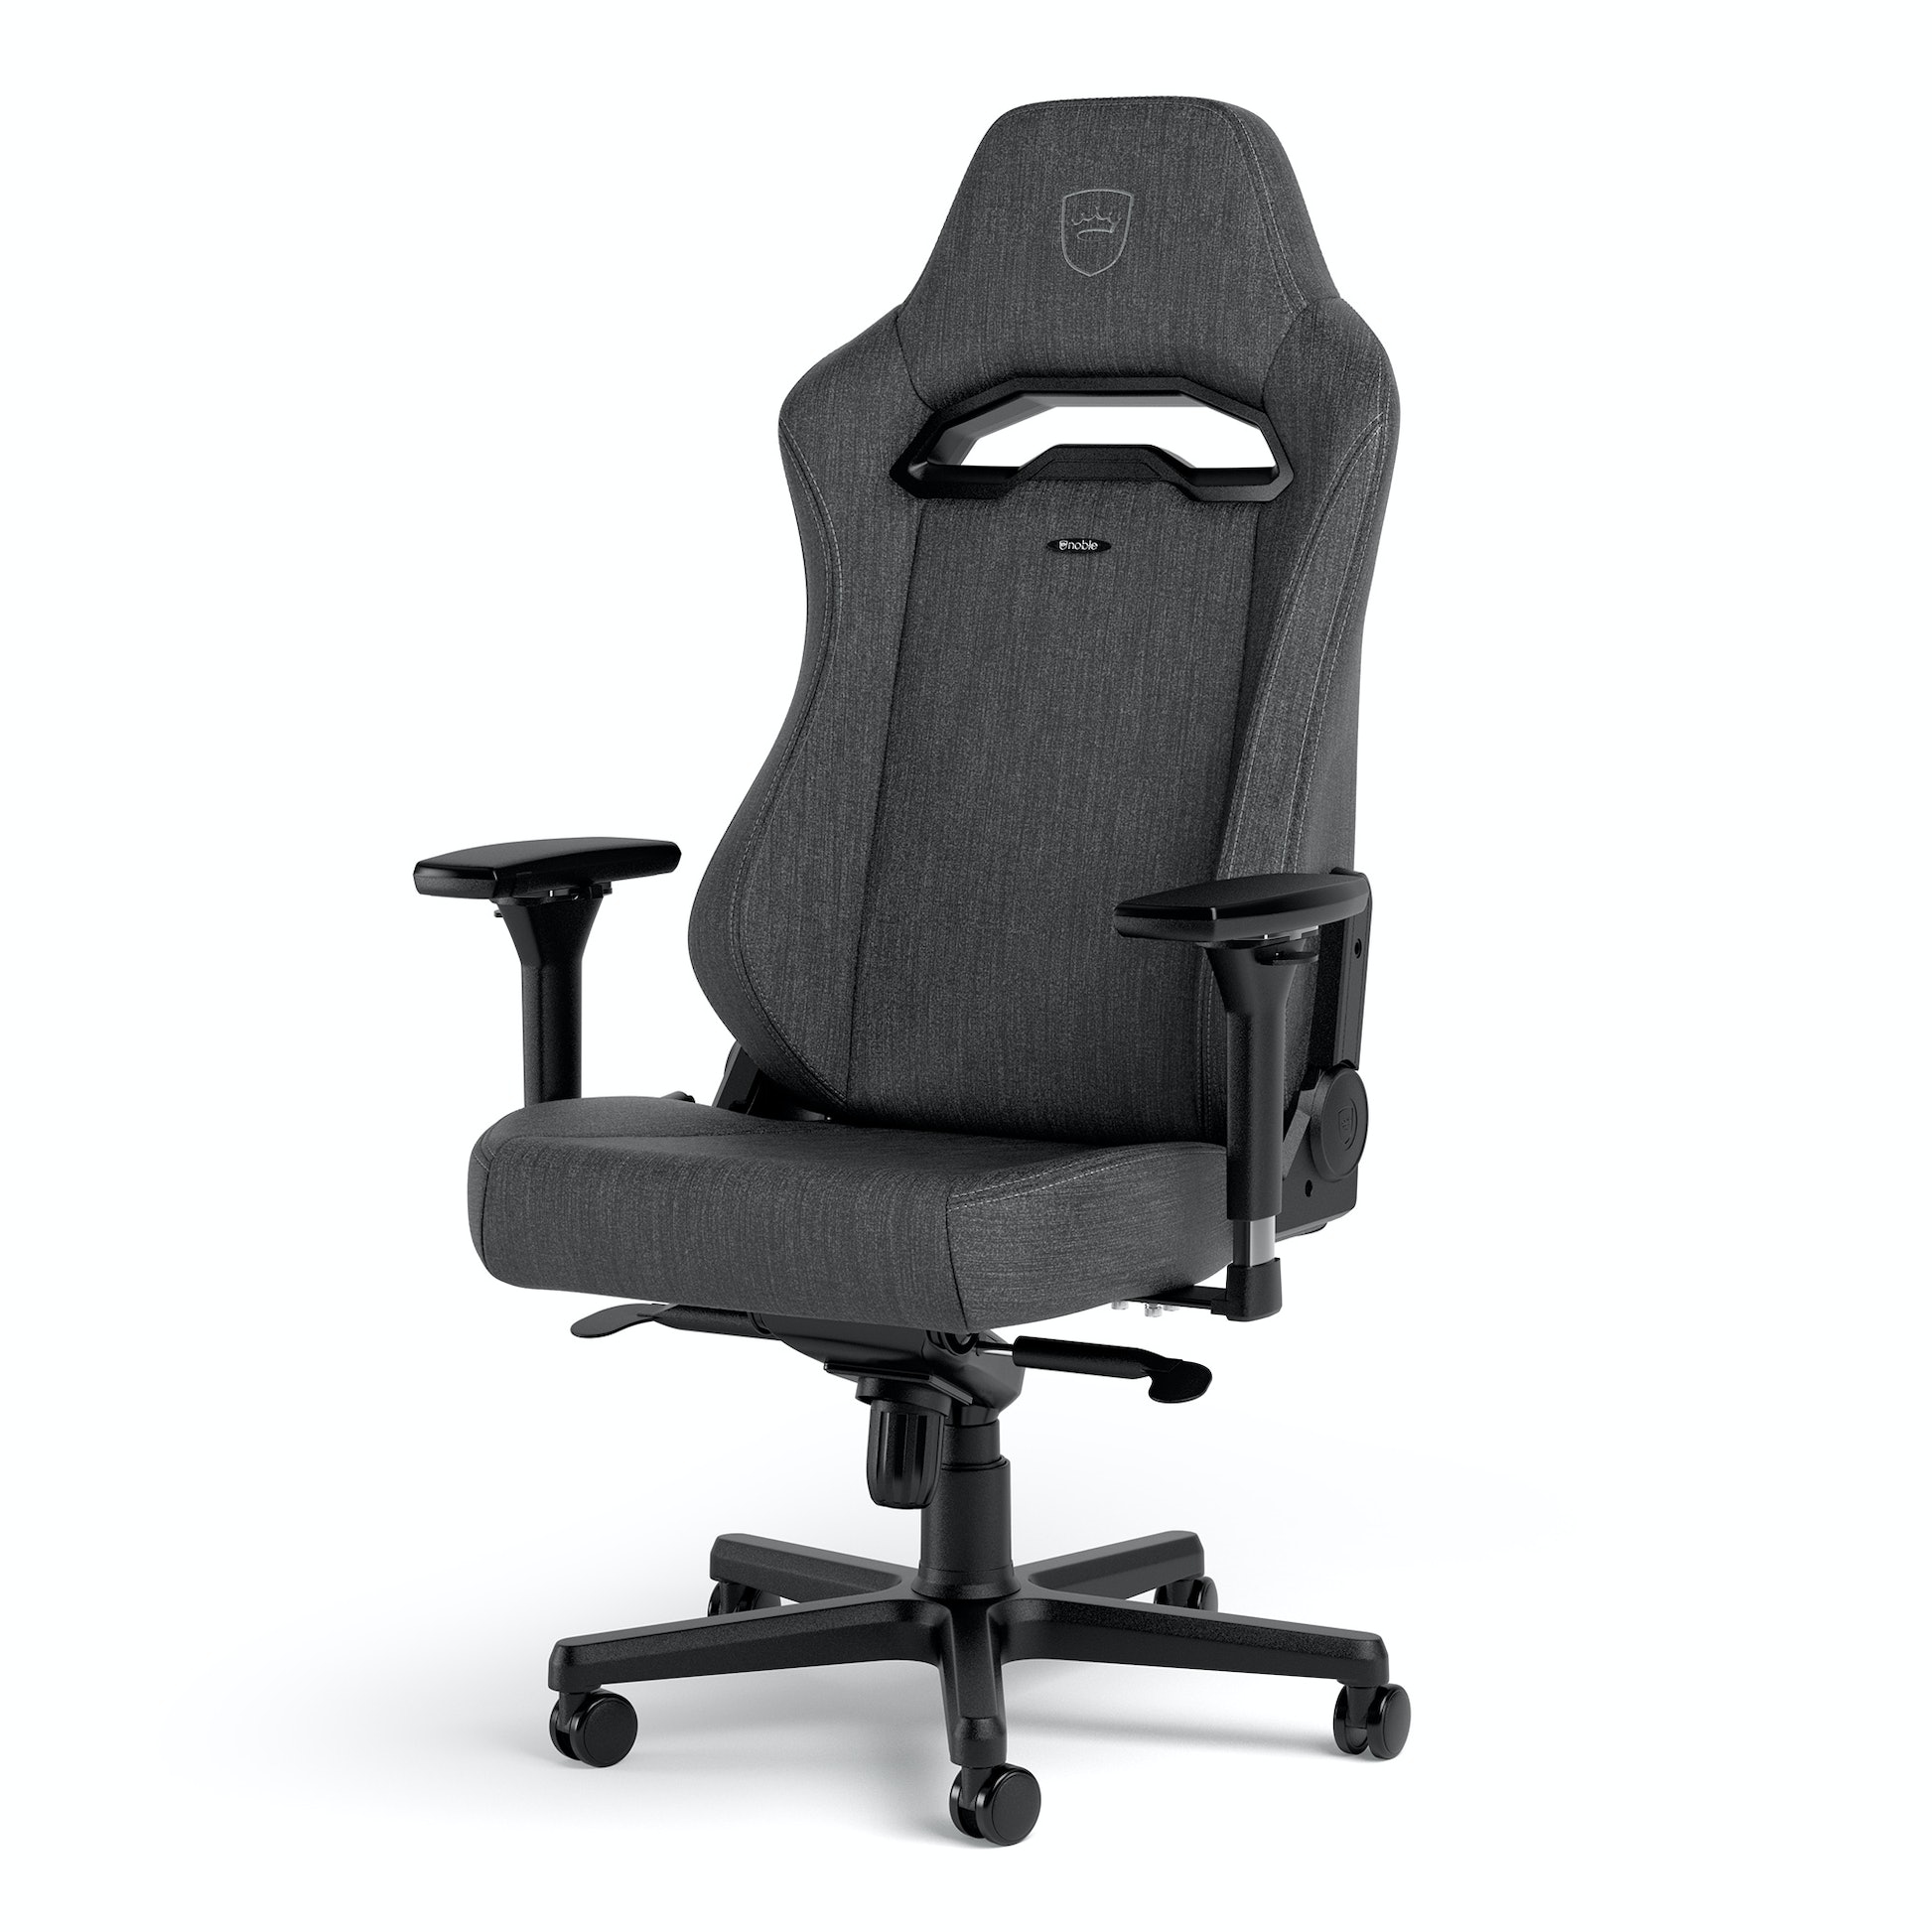 noblechairs - Cadeira noblechairs HERO ST TX - Fabric Edition Anthracite